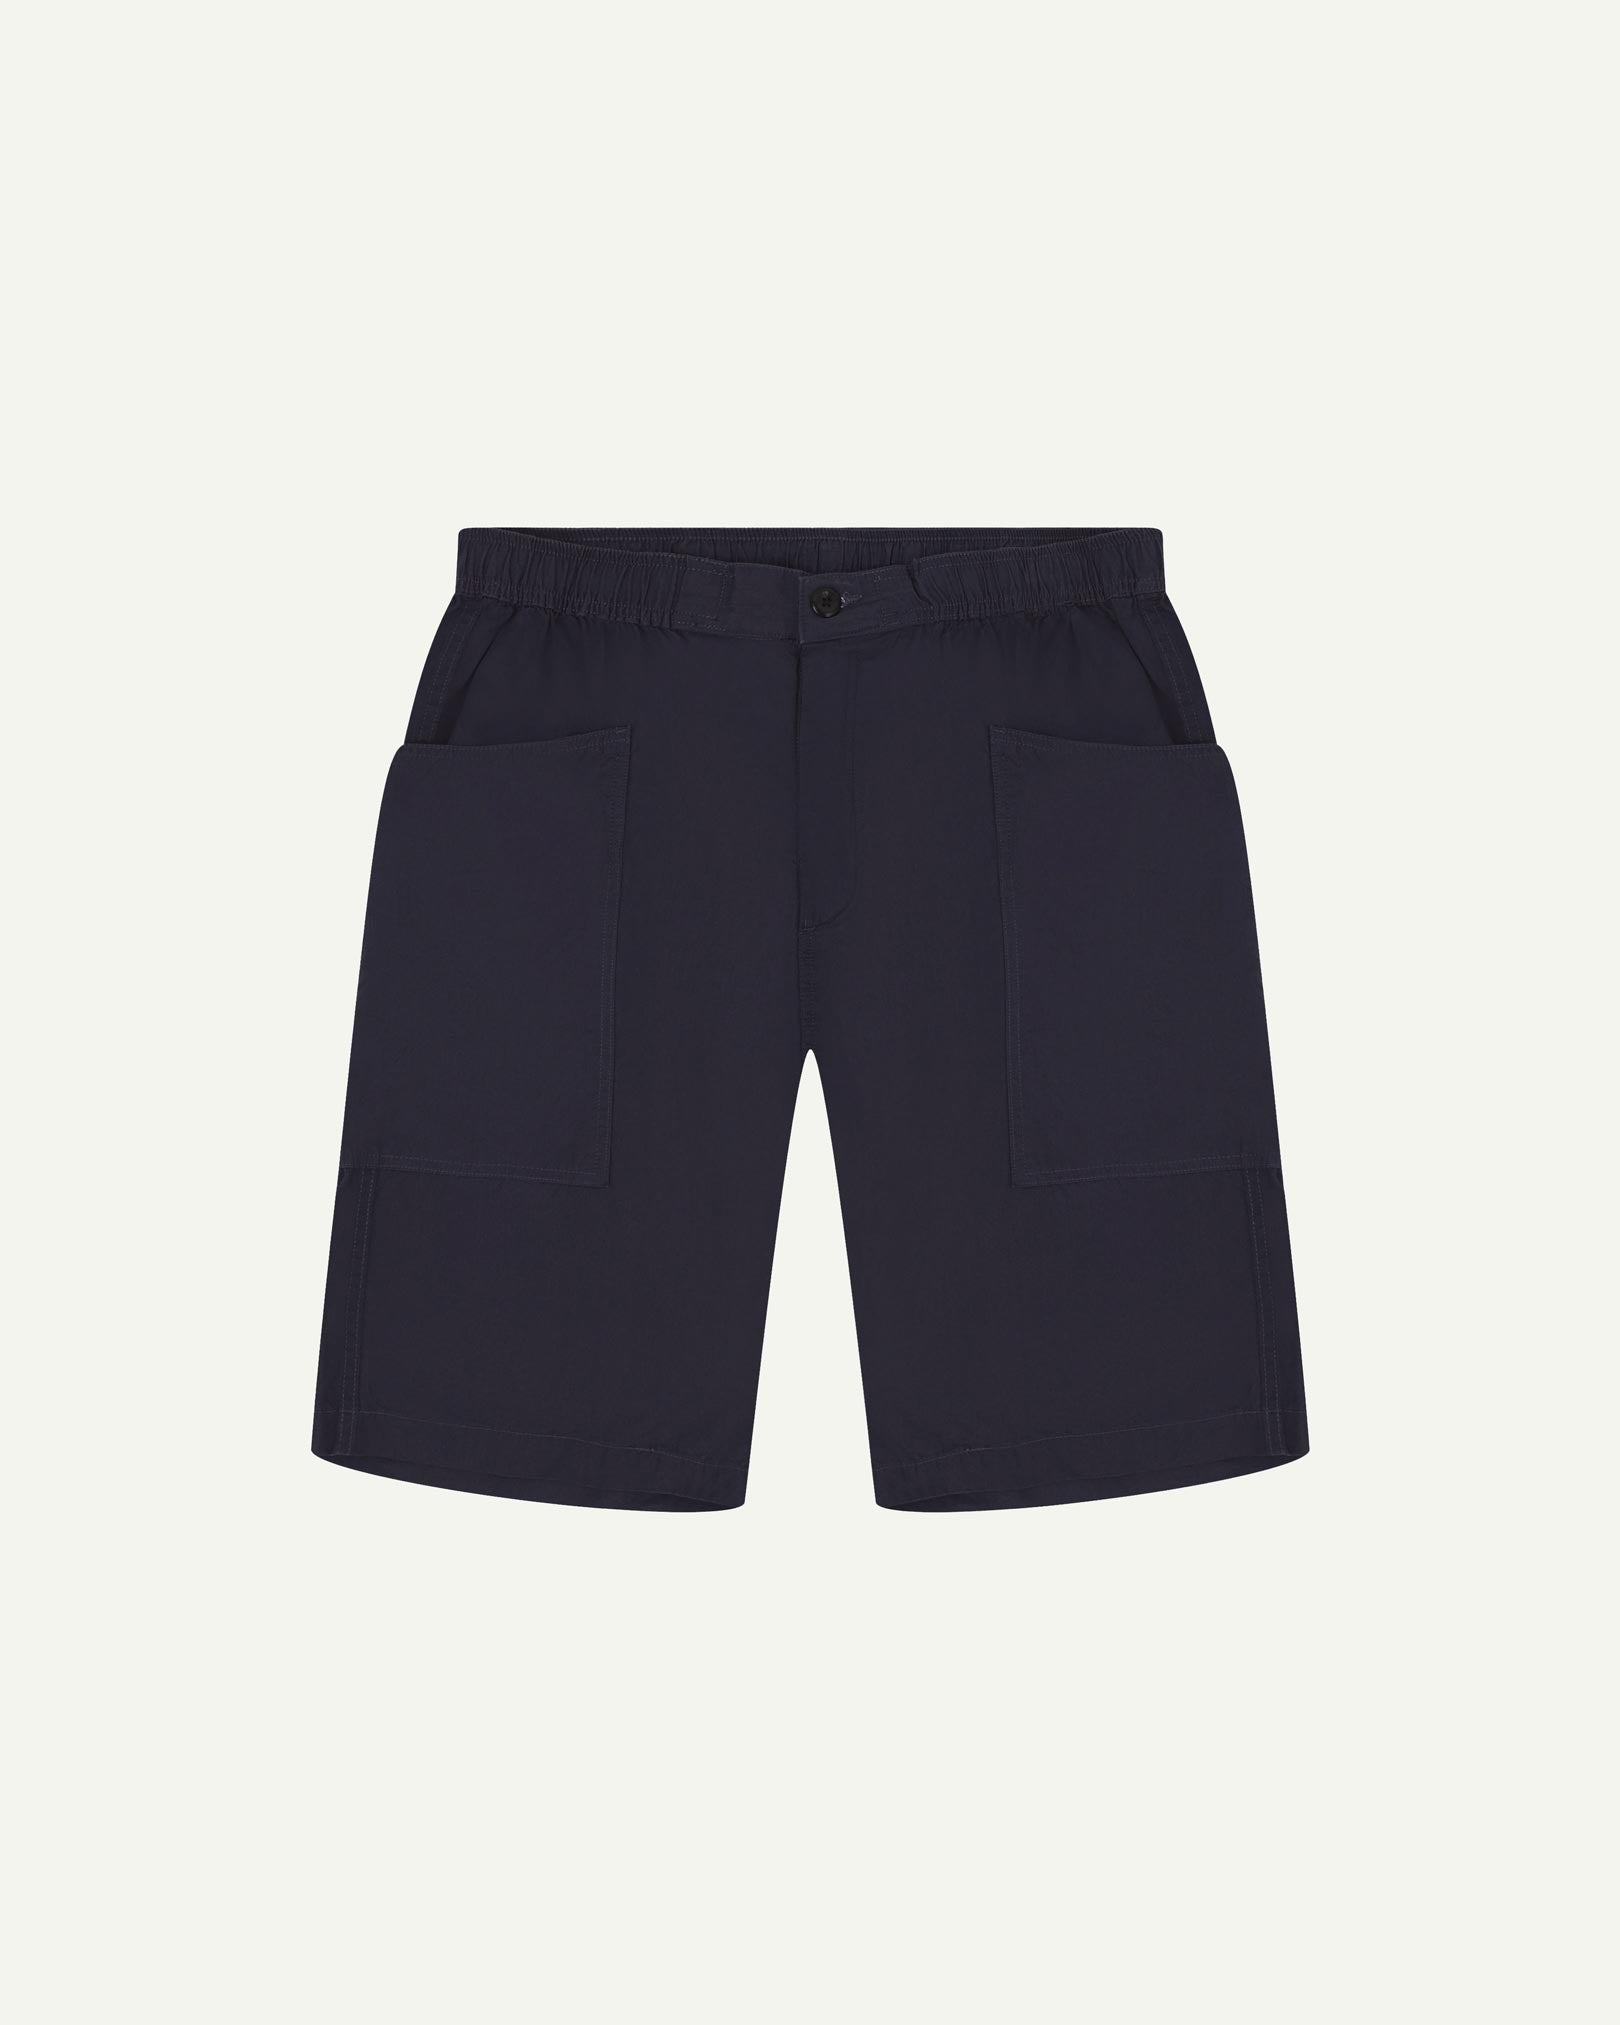 Front flat view of midnight blue organic cotton #5015 lightweight cotton shorts by Uskees. Clear view of drawstring and deep front pockets.